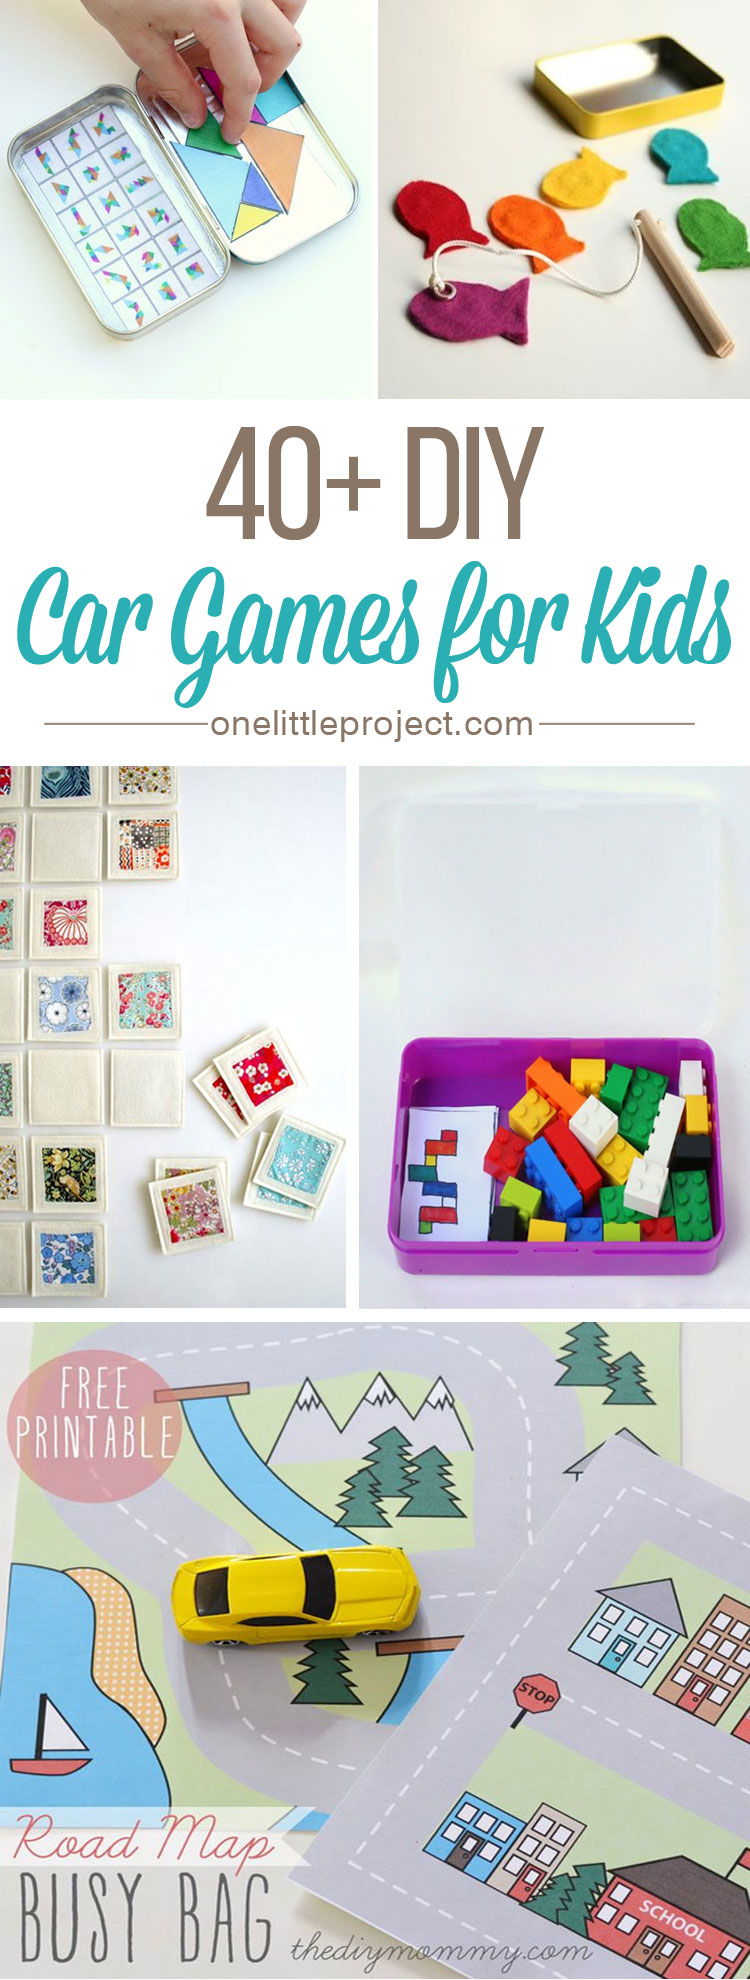 100+ Activities to keep kids busy this summer